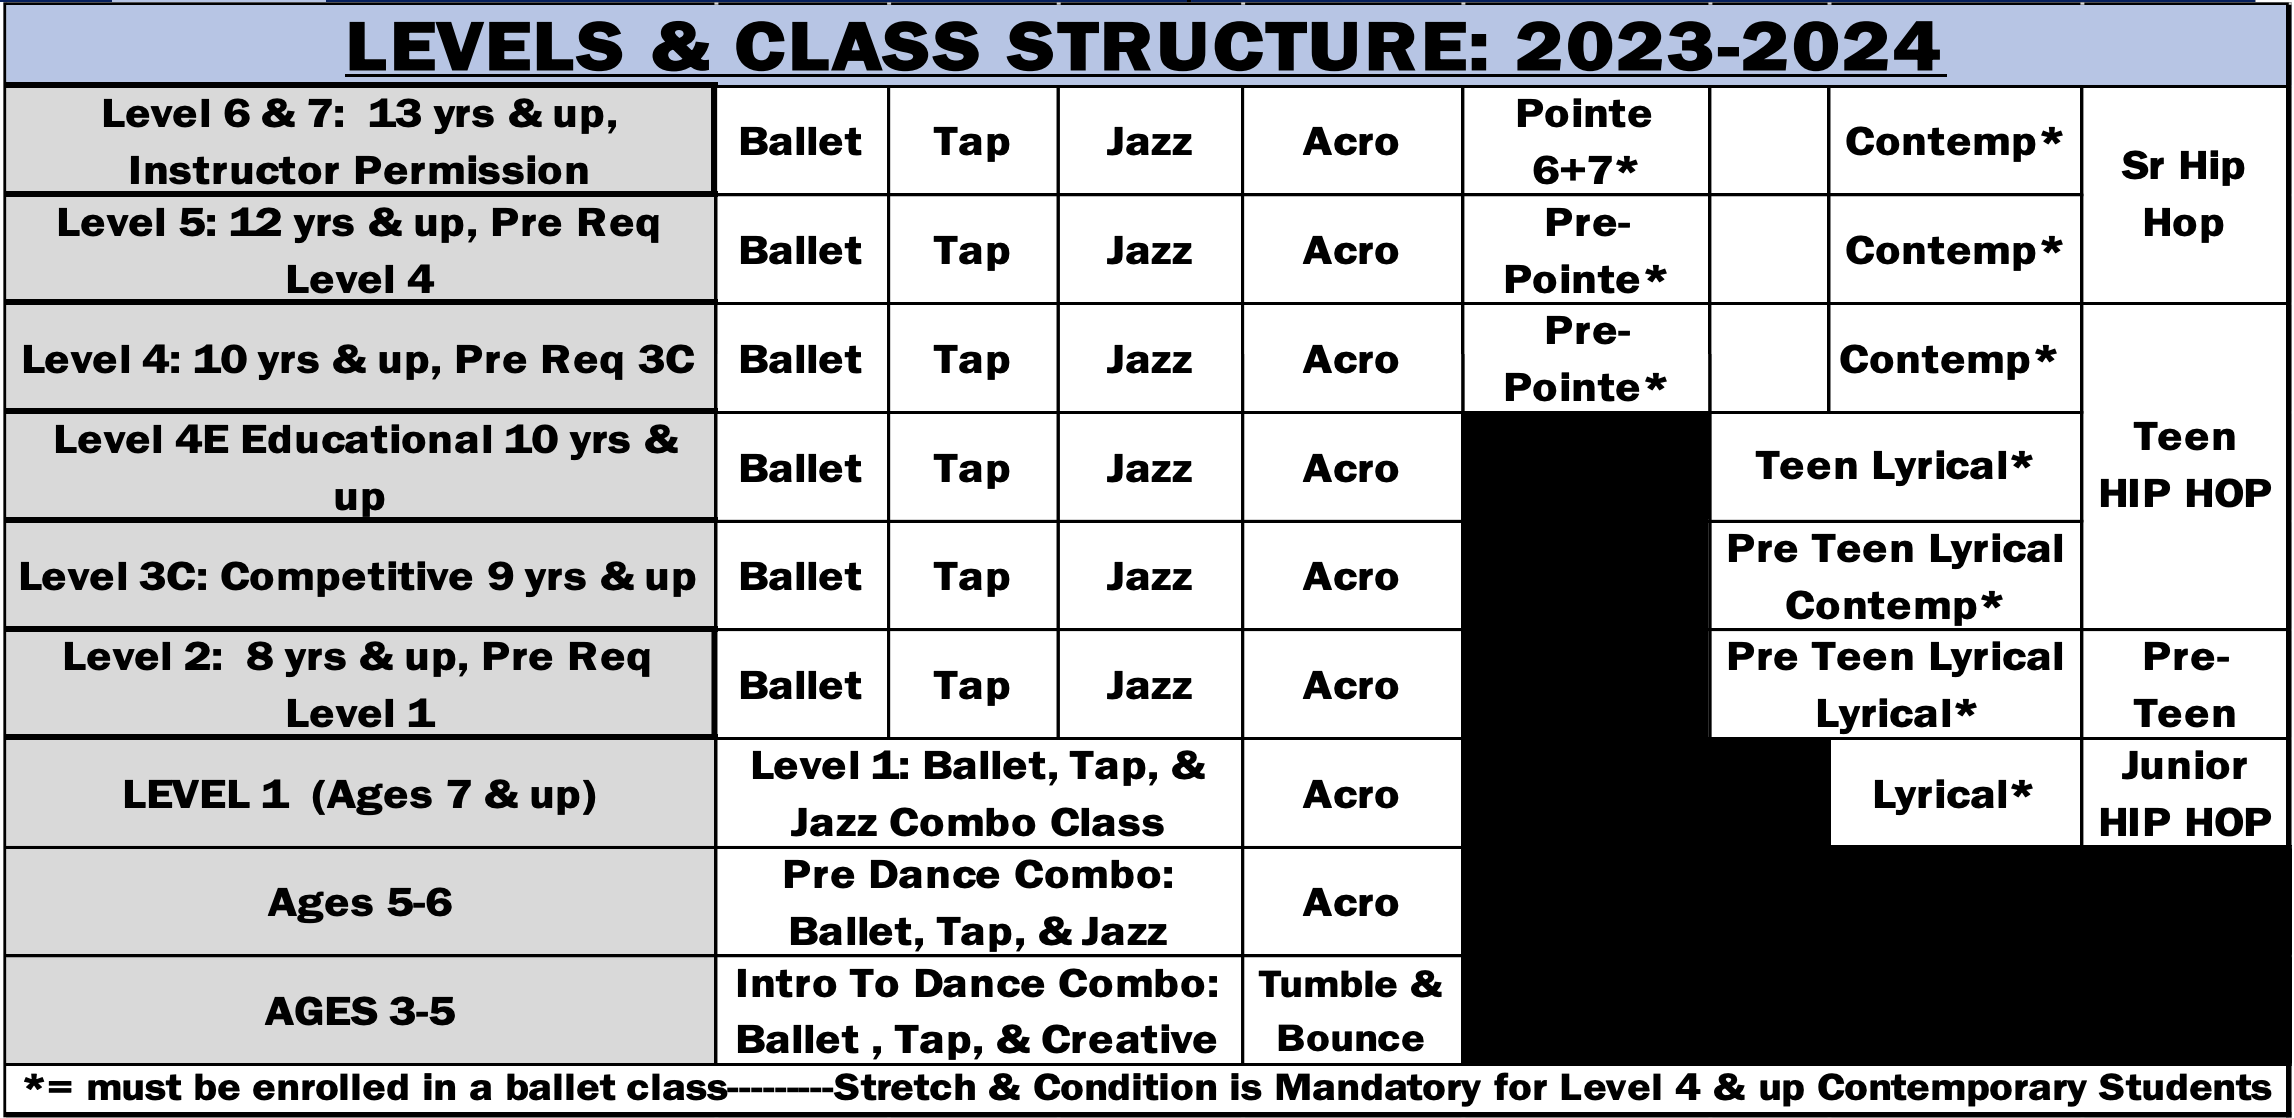 Levels and Class structure 2023-2024 graphic.